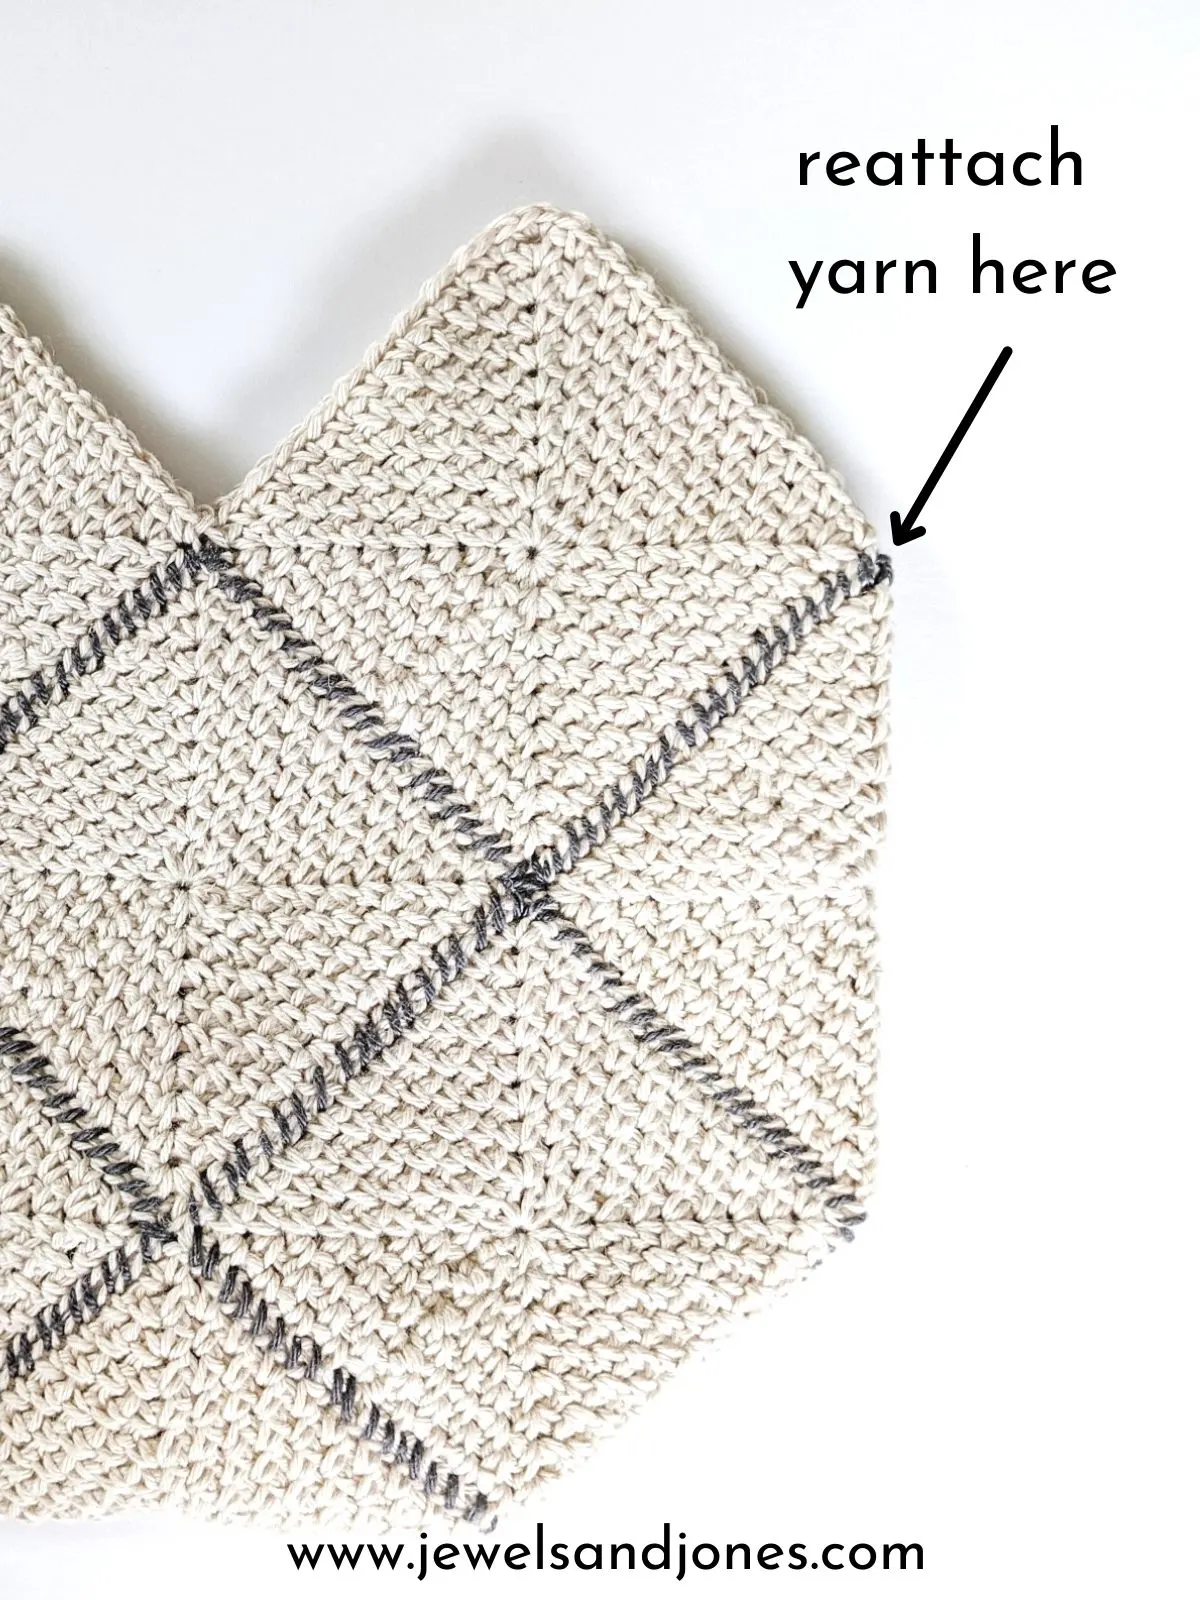 Image shows how to make straps for your crochet bag.